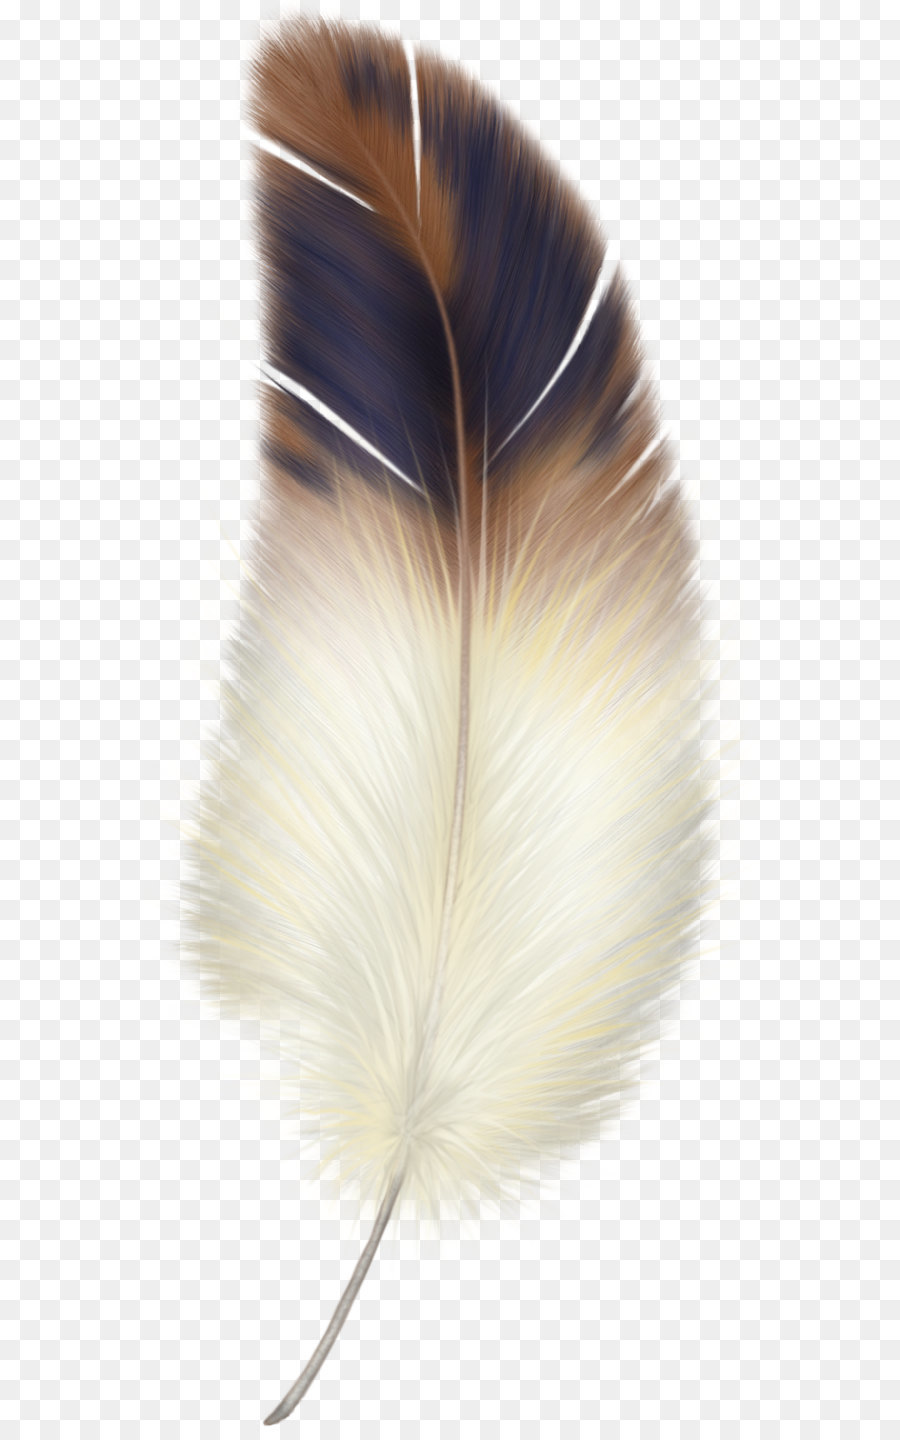 Feather Bird Clip art - Feather PNG png download - 888*1950 - Free Transparent Feather png Download.